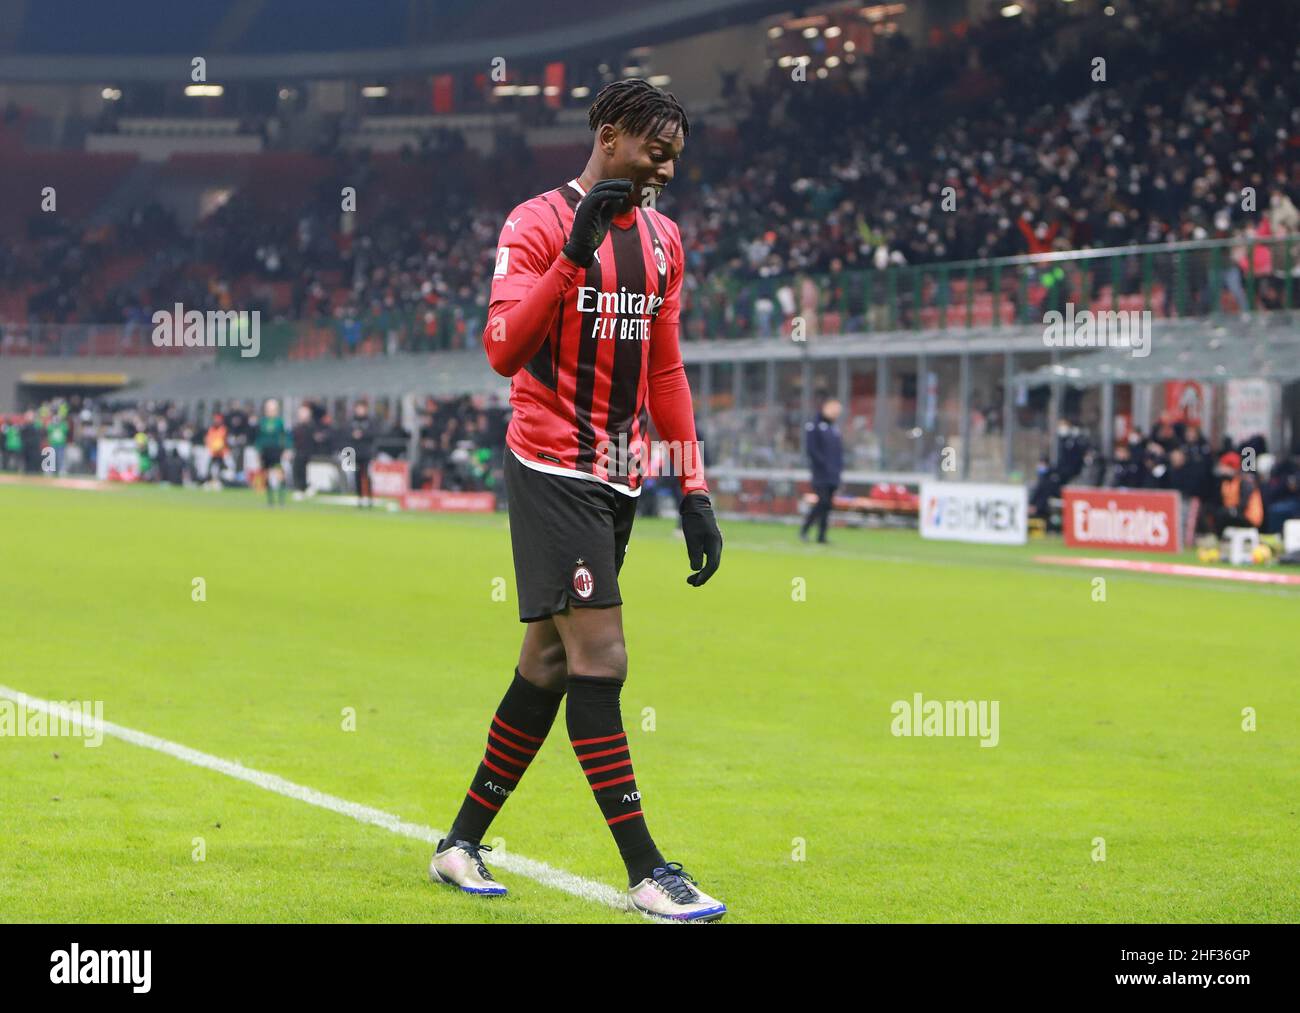 Milan, Italy. 06th Jan, 2022. MILAN ITALY- January 13 Stadio G Meazza Leao celebraties is goal during the Italy Cup match between Ac Milan and Cfc Genoa at Stadio G. Meazza on January 13 2022 in Milan, Italy. Credit: Christian Santi/Alamy Live News Stock Photo